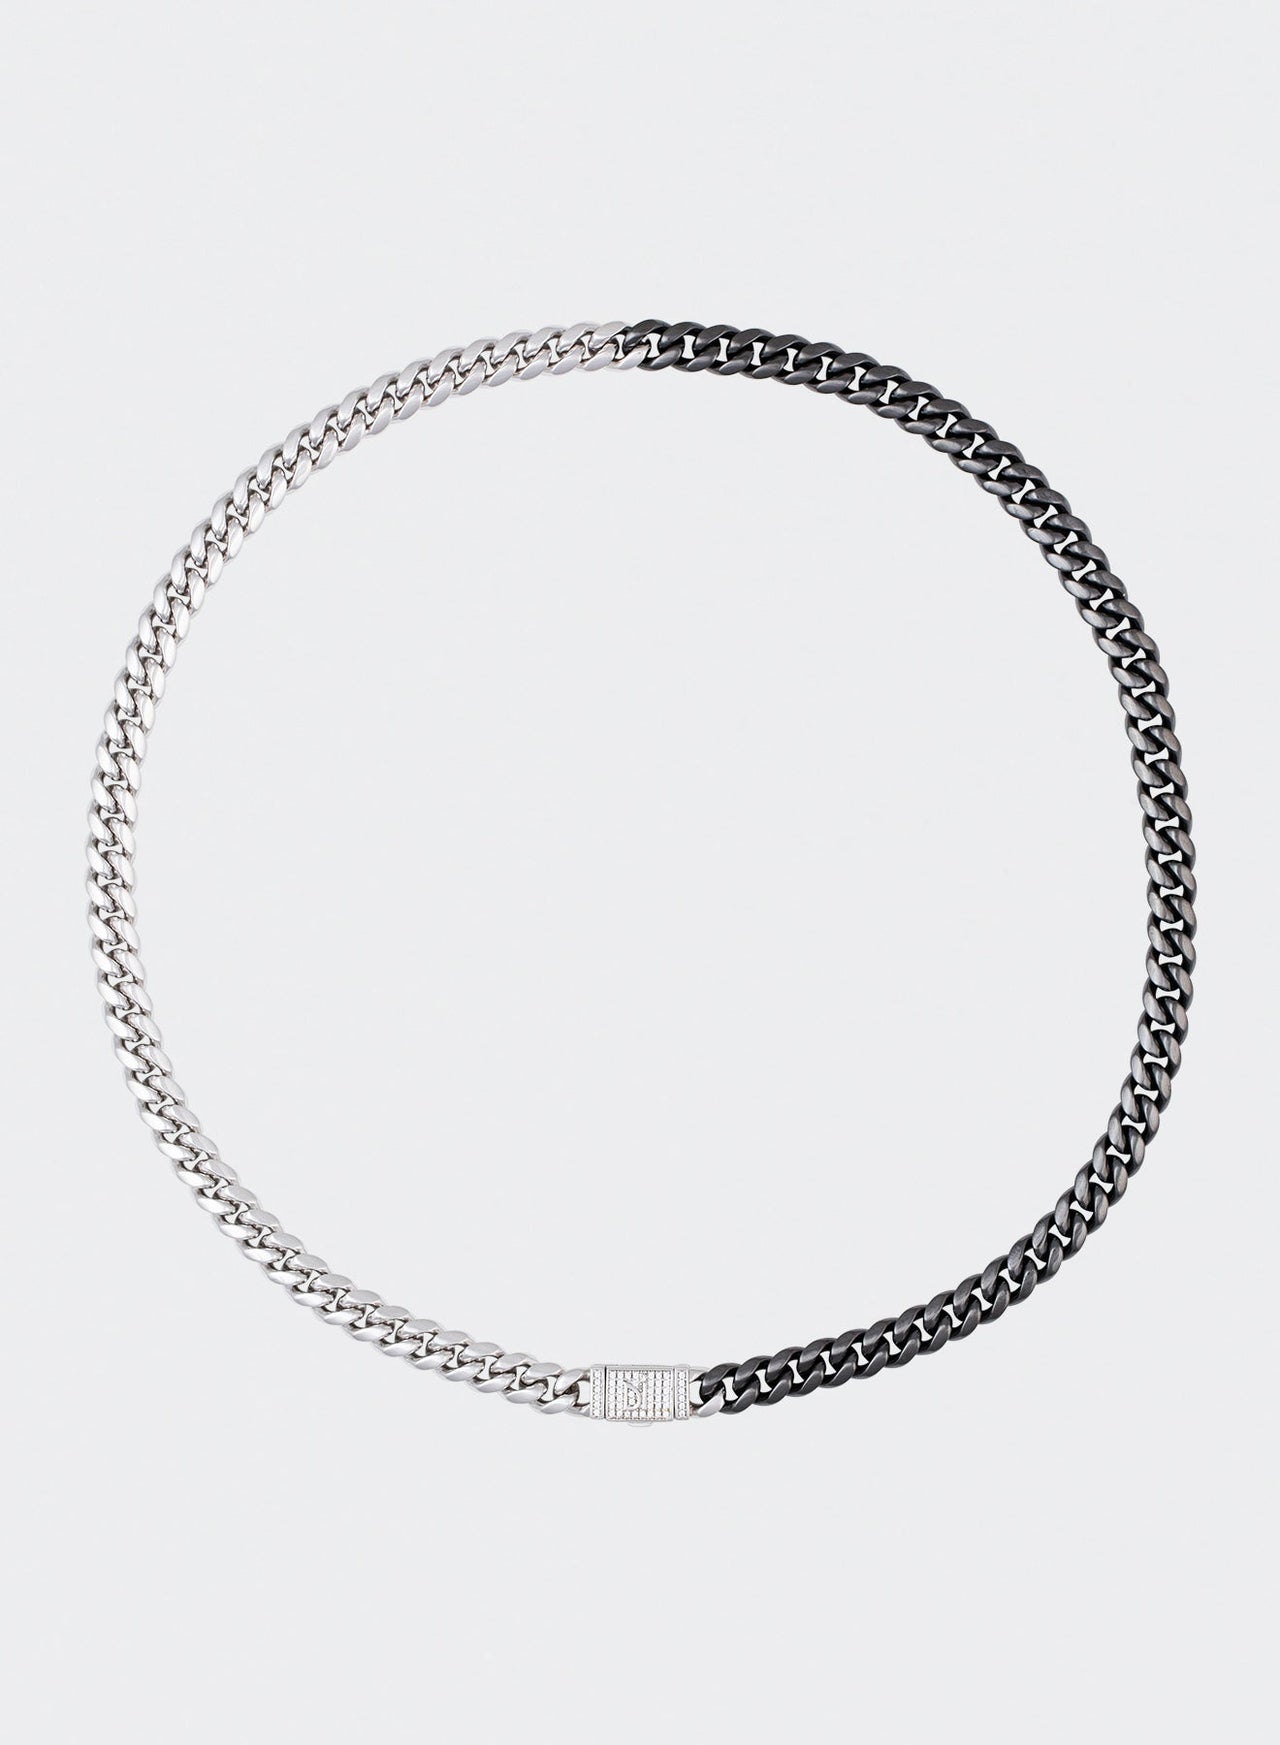 18k white gold and gun black coated cuban chain necklace with hand-set micropavé stones in white